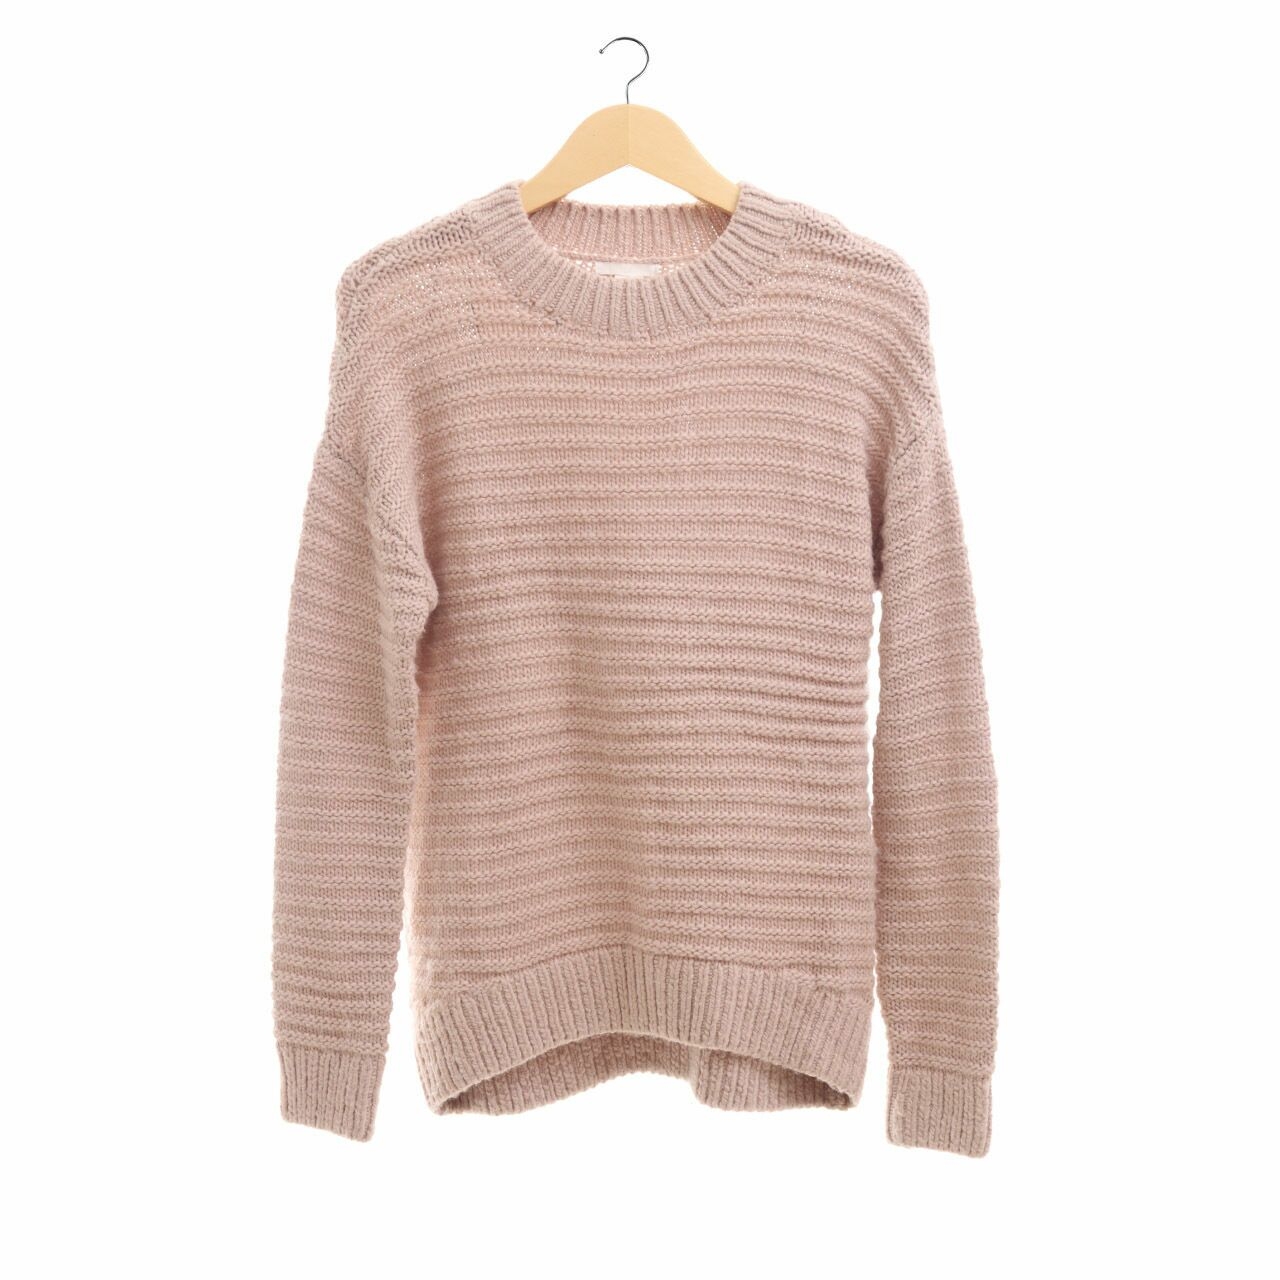 H&M Dusty Pink Knit Sweater